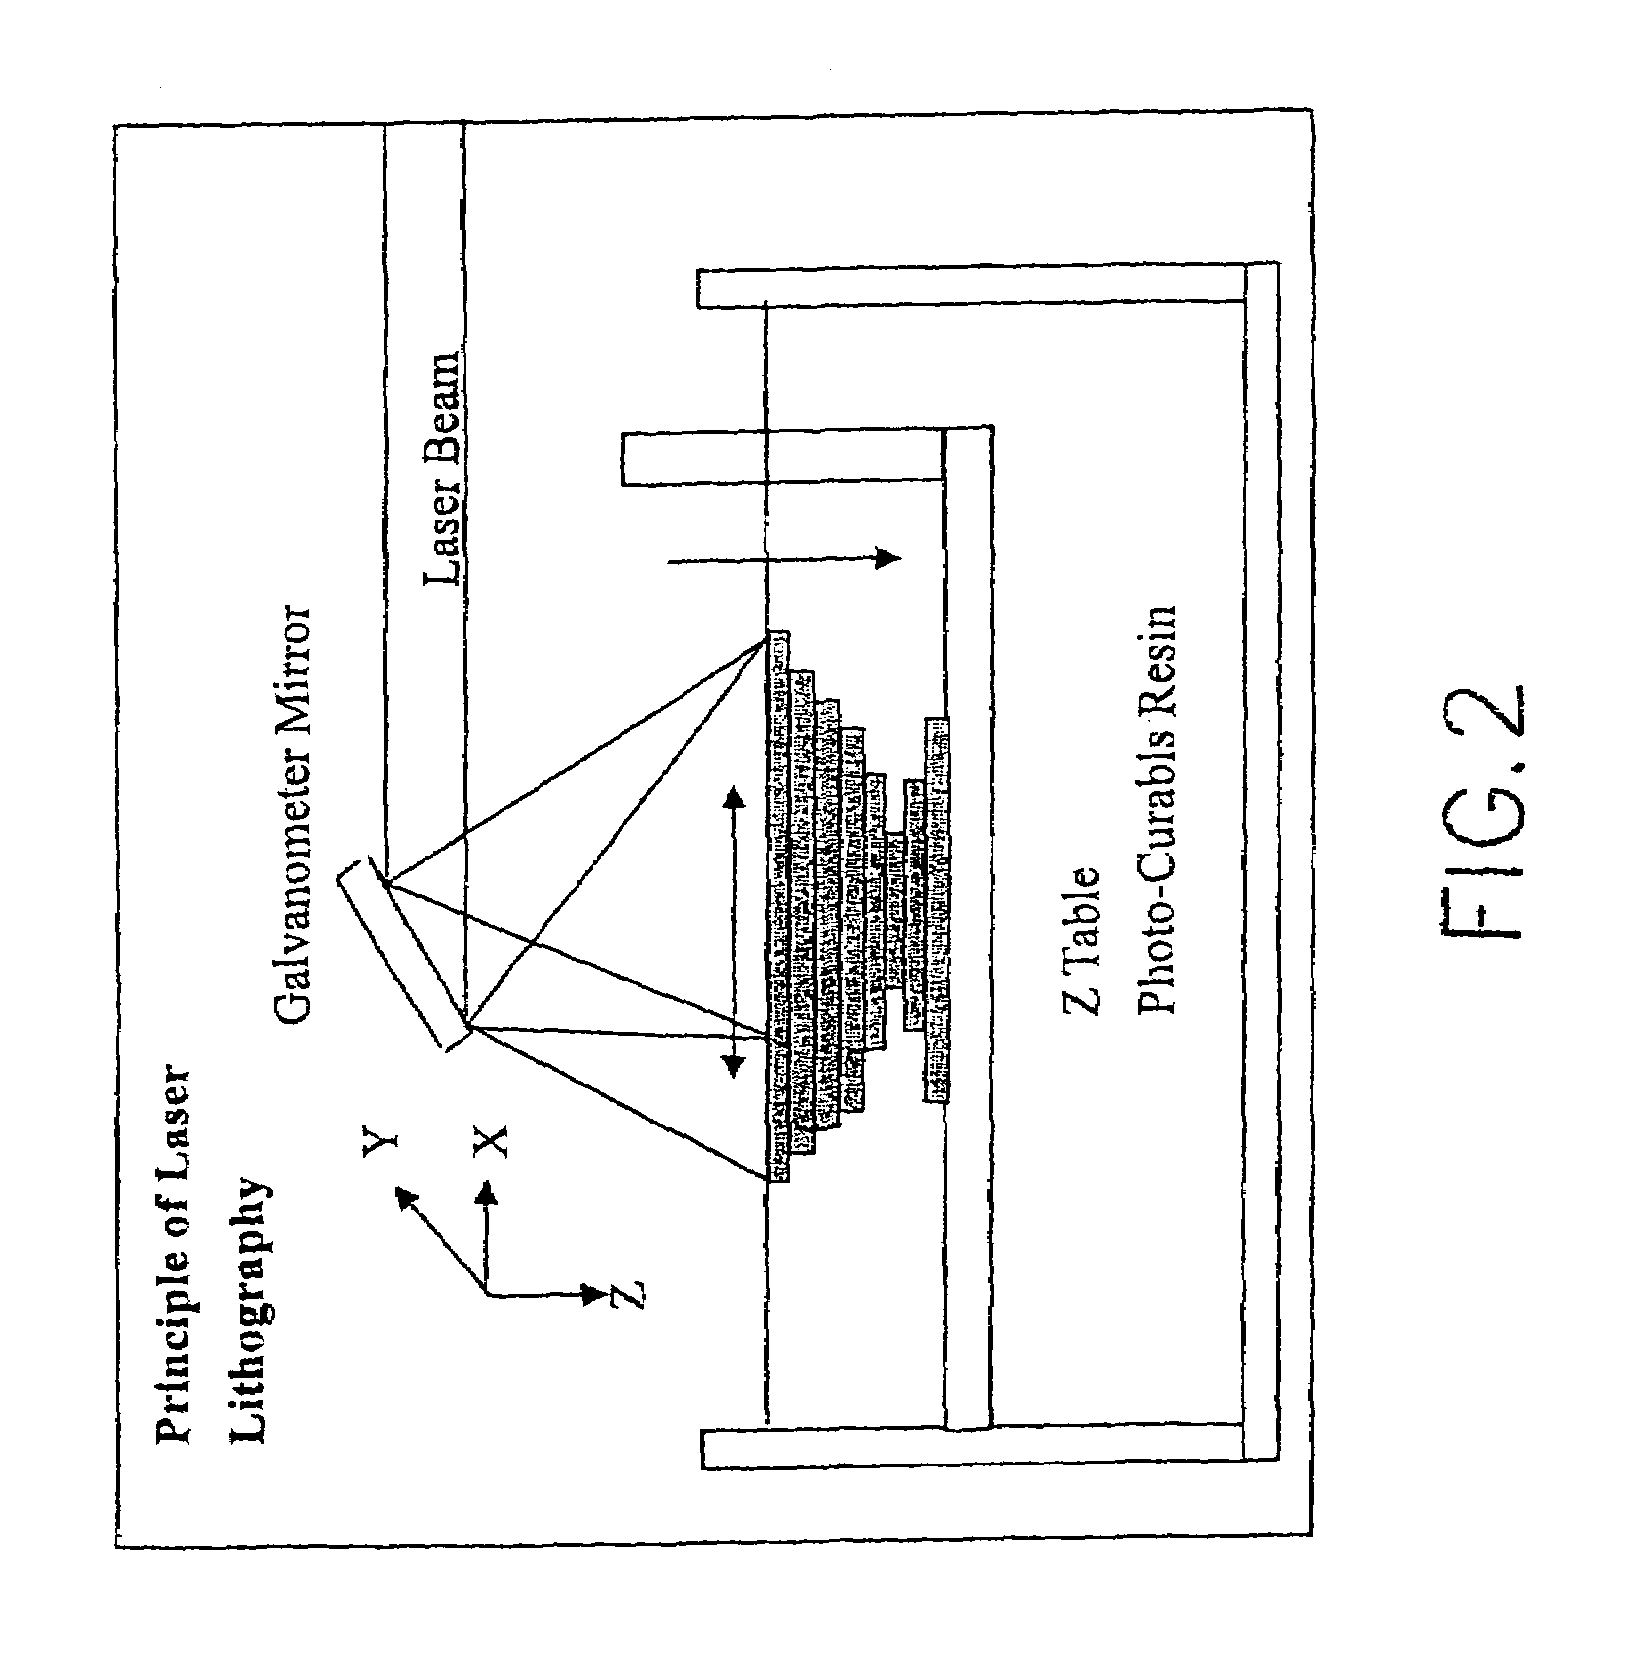 Method for rapid prototyping by using linear light as sources